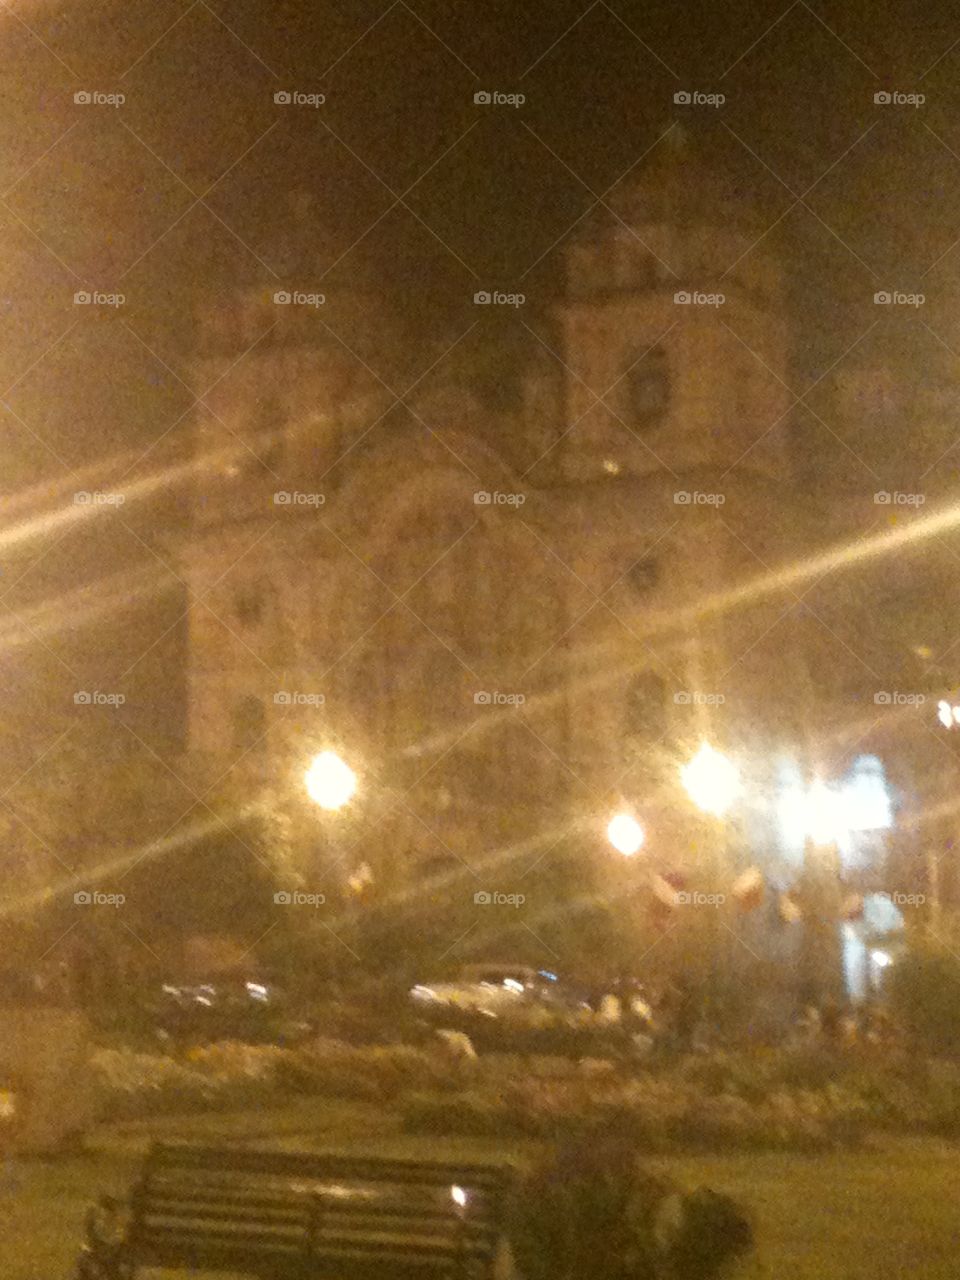 Catedral 